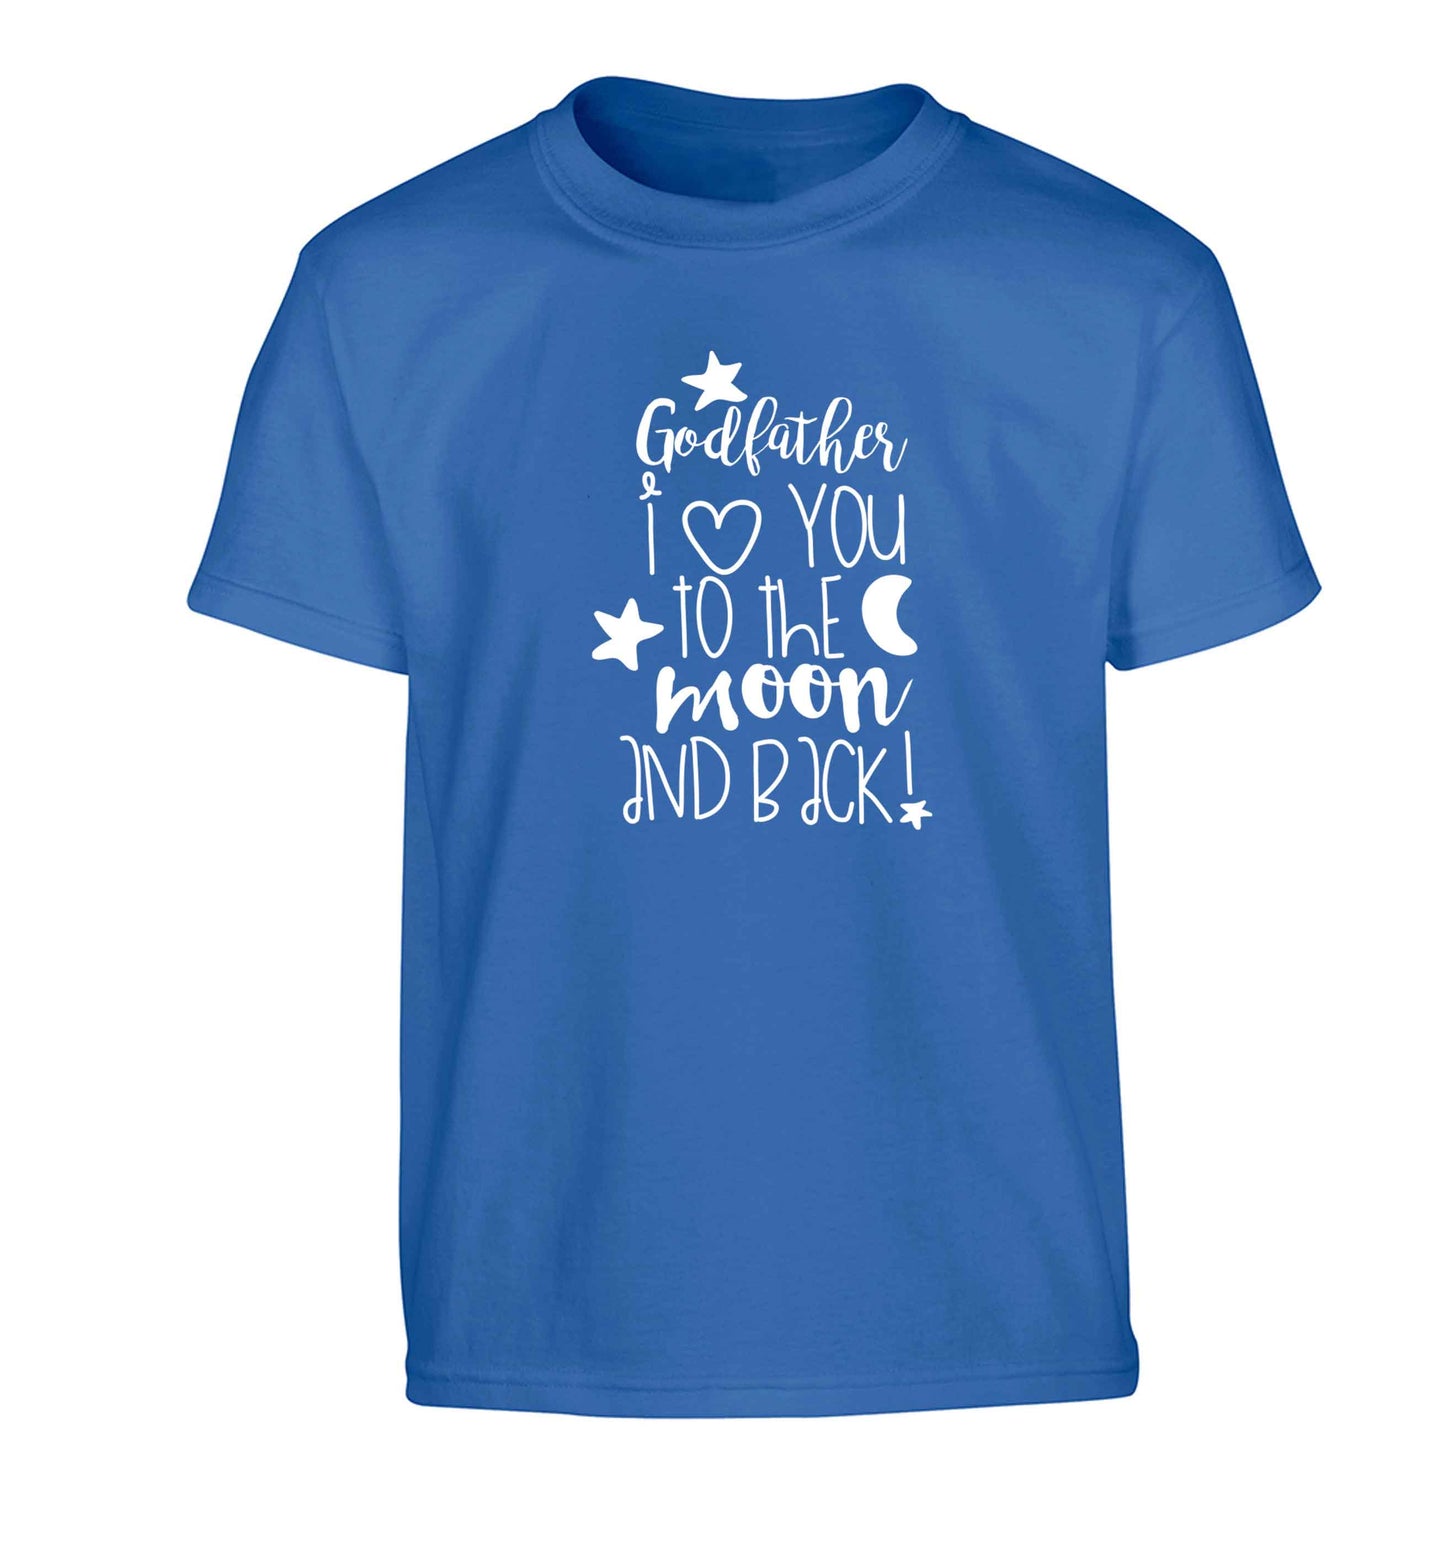 Godfather I love you to the moon and back Children's blue Tshirt 12-13 Years